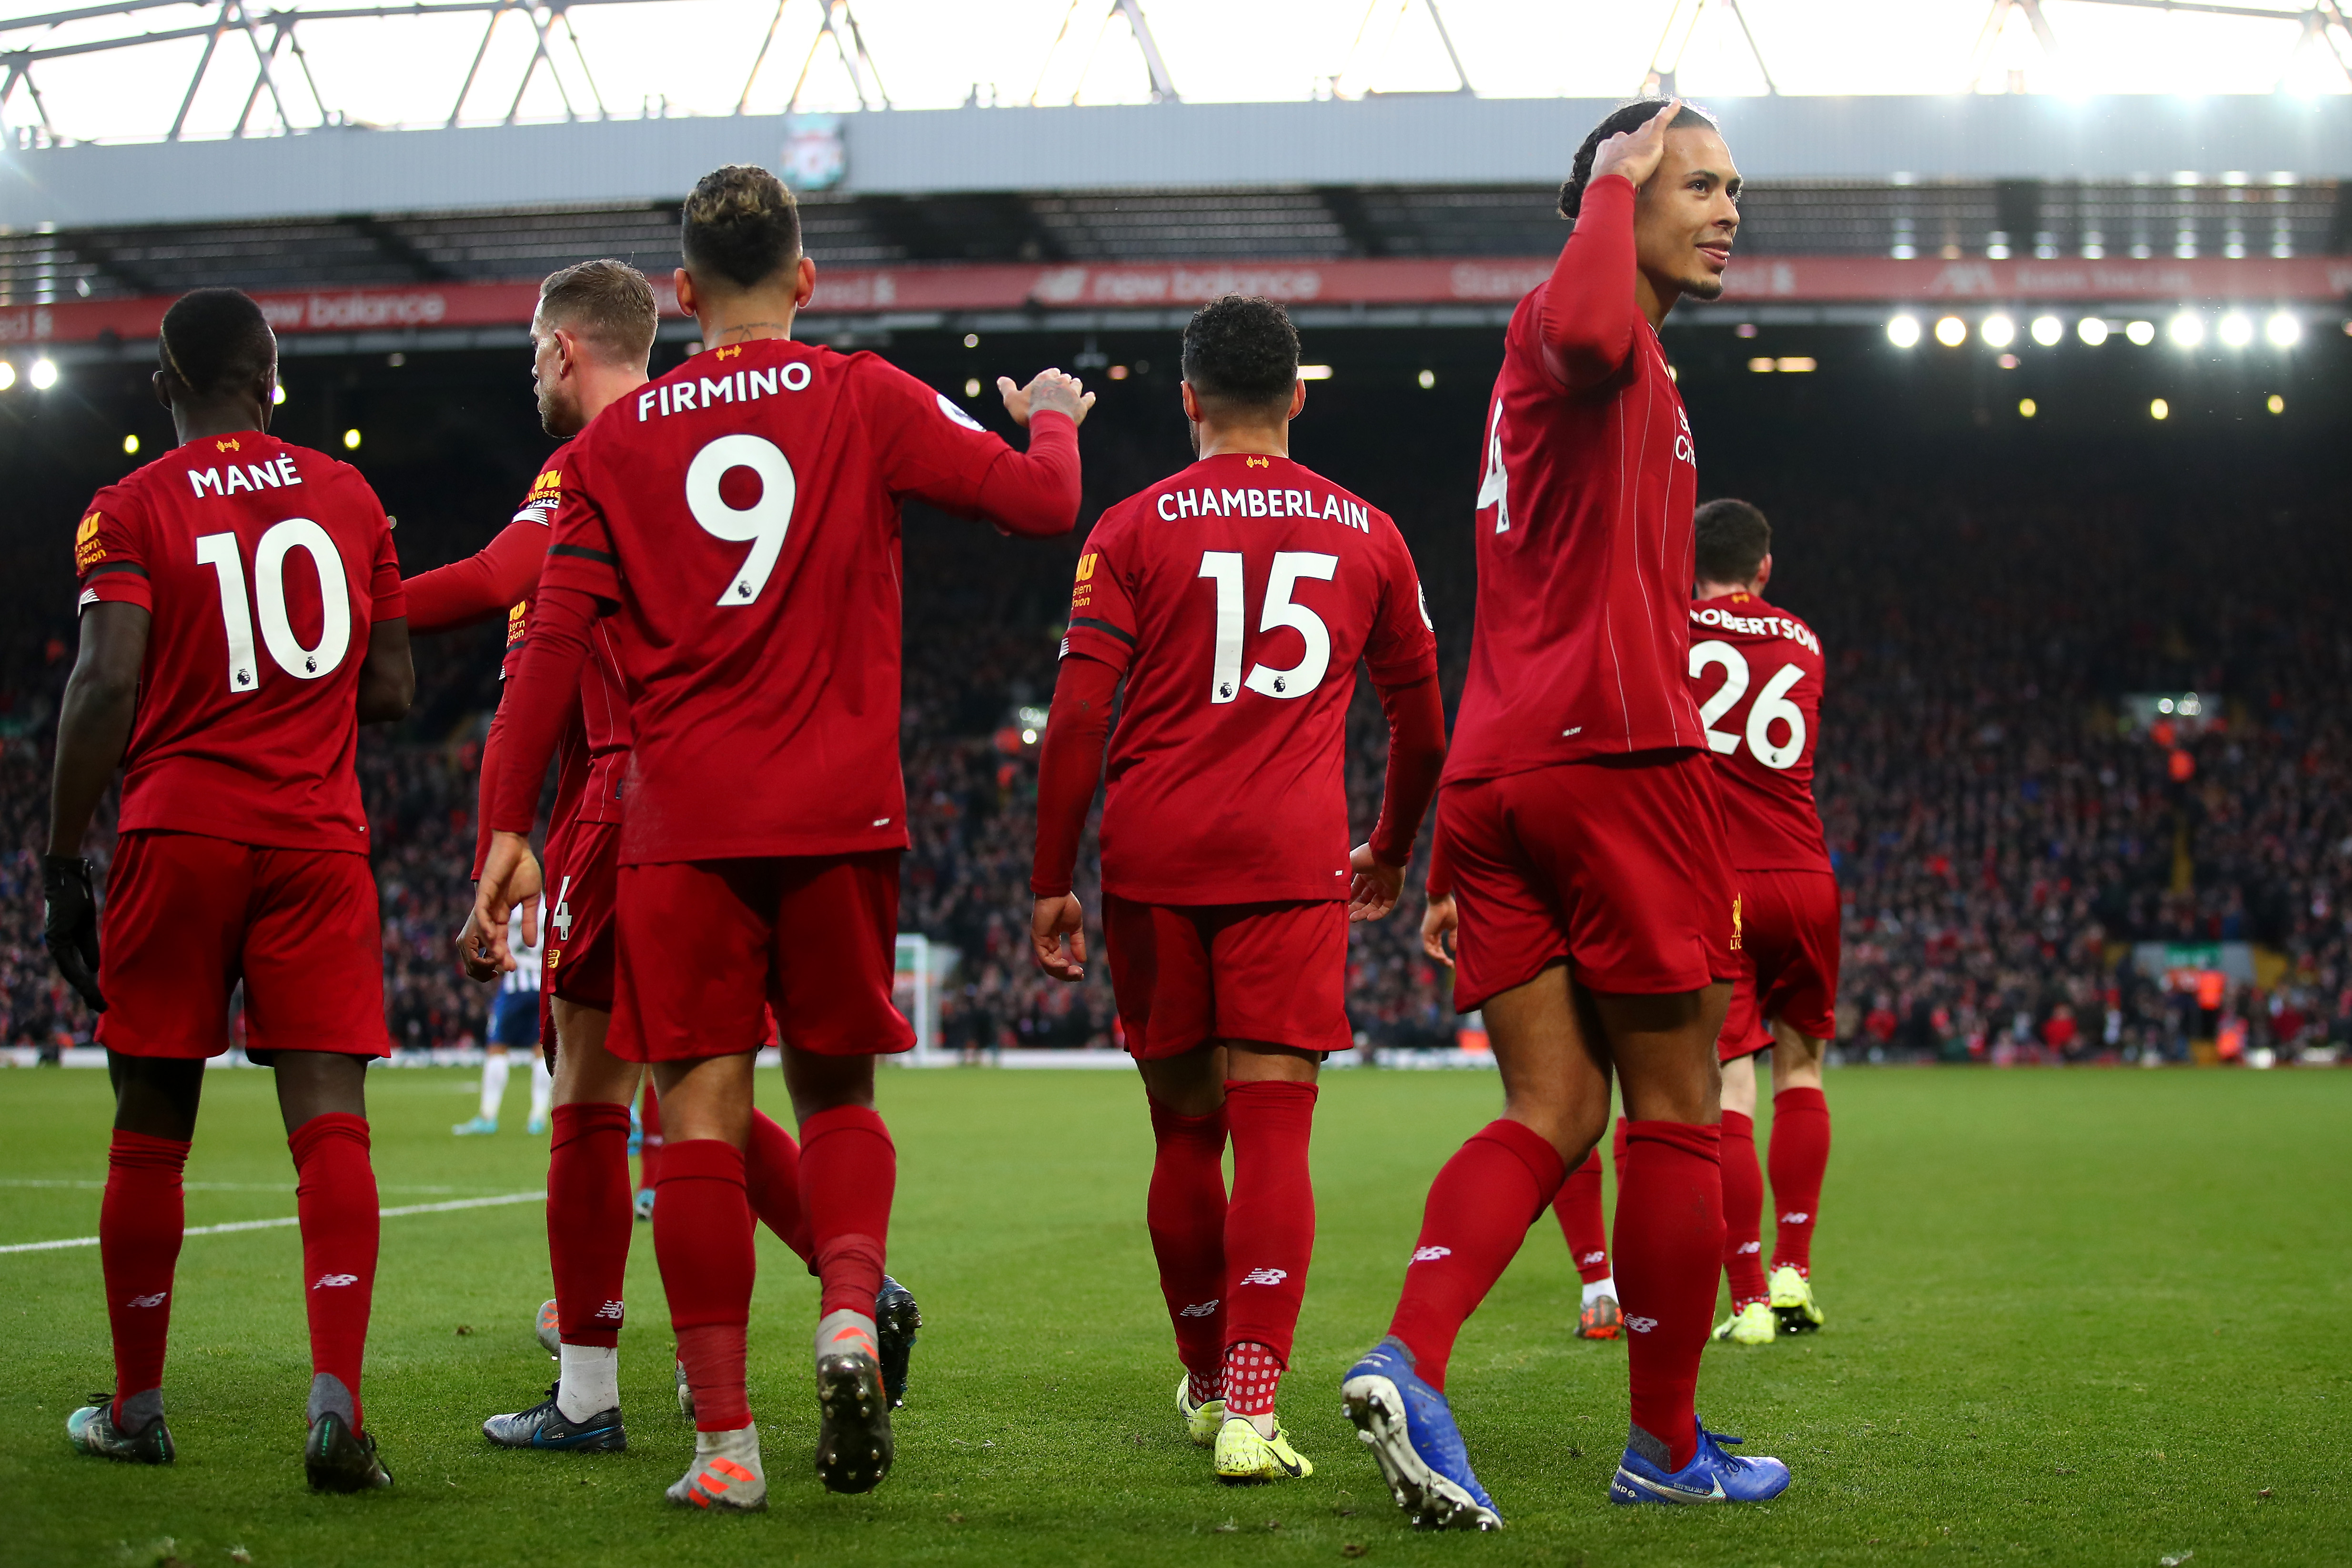 LIVERPOOL, ENGLAND - NOVEMBER 30: Virgil van Dijk of Liverpool celebrates scoring his teams second goal with team mates during the Premier League match between Liverpool FC and Brighton & Hove Albion at Anfield on November 30, 2019 in Liverpool, United Kingdom. (Photo by Clive Brunskill/Getty Images)